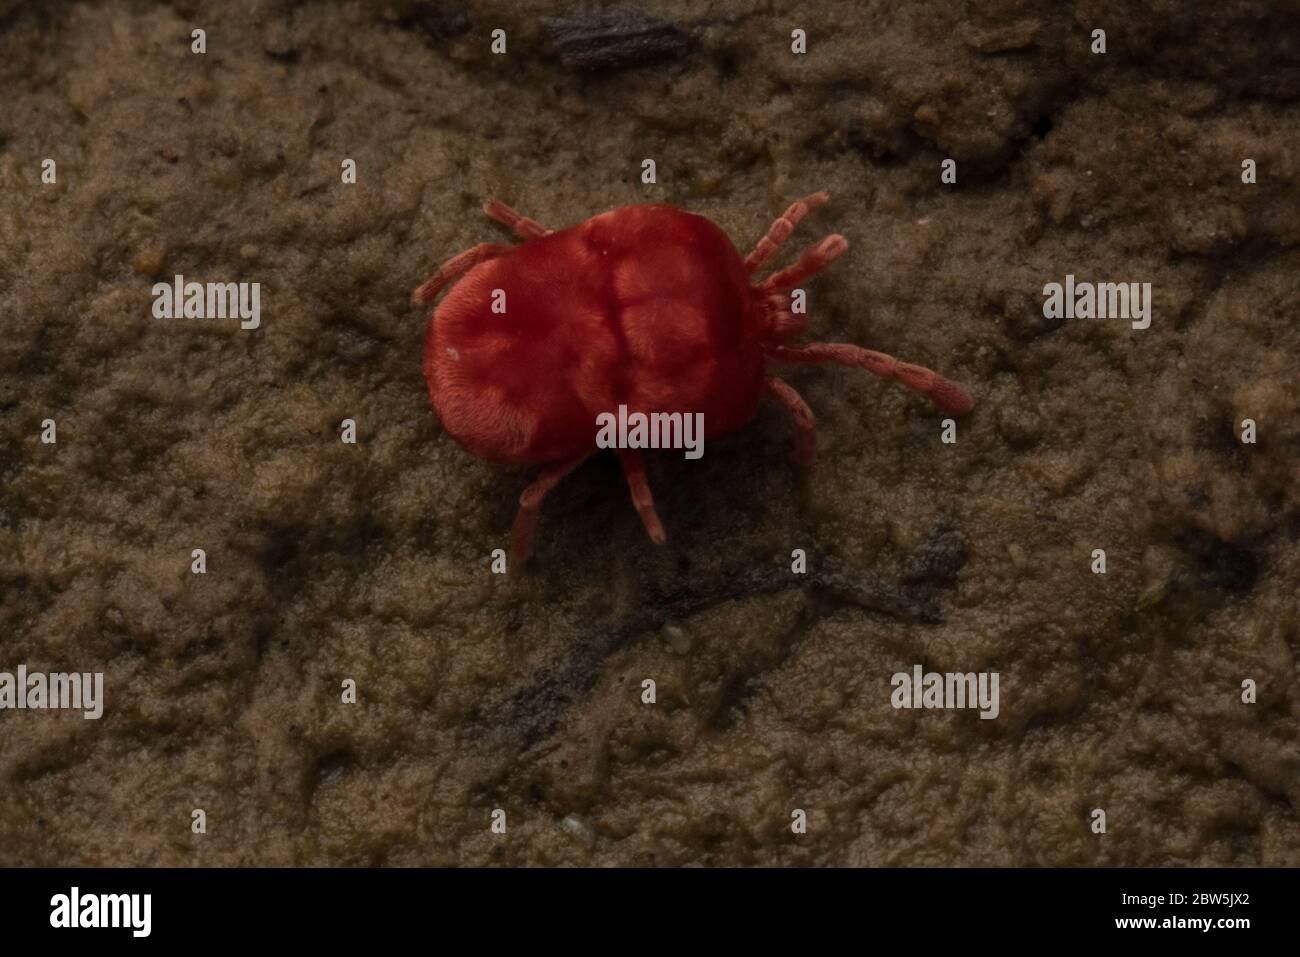 A red velvet mite, likely a member of the genus Trombidium crawling on mud in the Sacramento valley, CA. Stock Photo